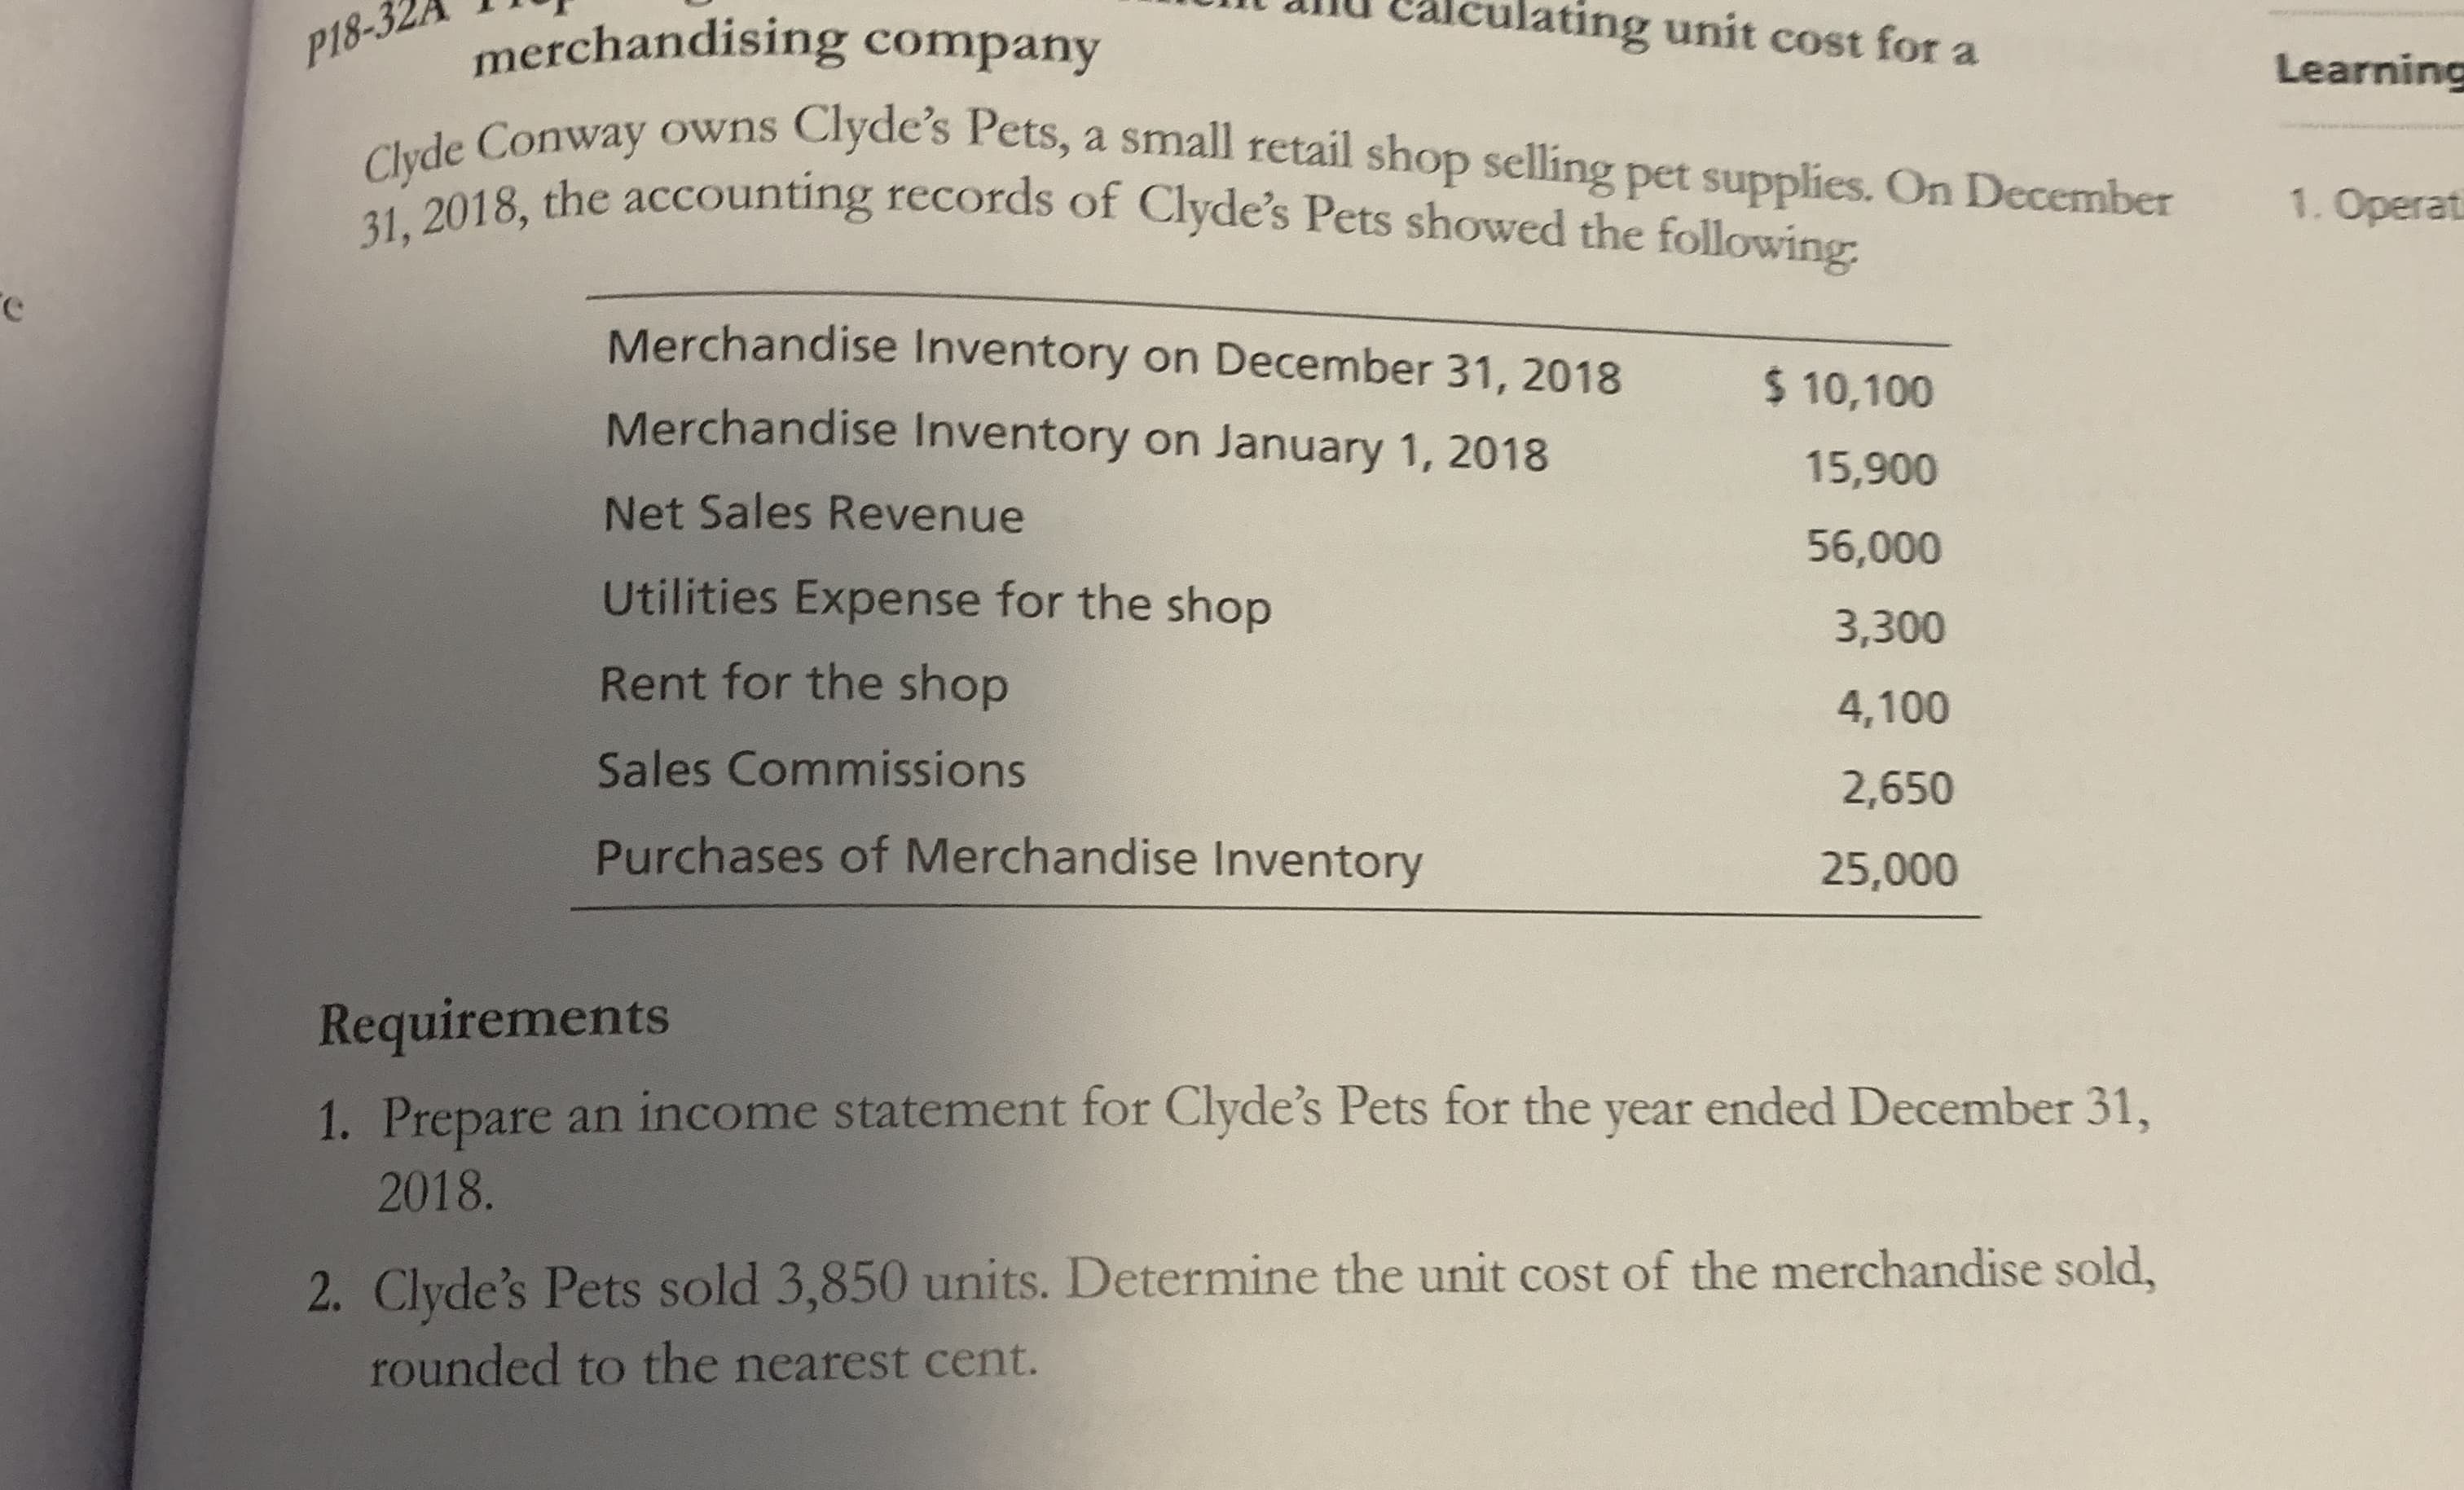 ating unit cost for a
merchandising company
a Conway owns Clyde's Pets, a small retail shop selling pet supplies. On December
P18-3
Learning
31, 2018, the accounting records of Clyde's Pets showed the following:
1. Operati
Merchandise Inventory on December 31, 2018
$ 10,100
Merchandise Inventory on January 1, 2018
15,900
Net Sales Revenue
56,000
Utilities Expense for the shop
3,300
Rent for the shop
4,100
Sales Commissions
2,650
Purchases of Merchandise Inventory
25,000
Requirements
1. Prepare an income statement for Clyde's Pets for the year ended December 31,
2018.
2. Clyde's Pets sold 3,850 units. Determine the unit cost of the merchandise sold,
rounded to the nearest cent.
